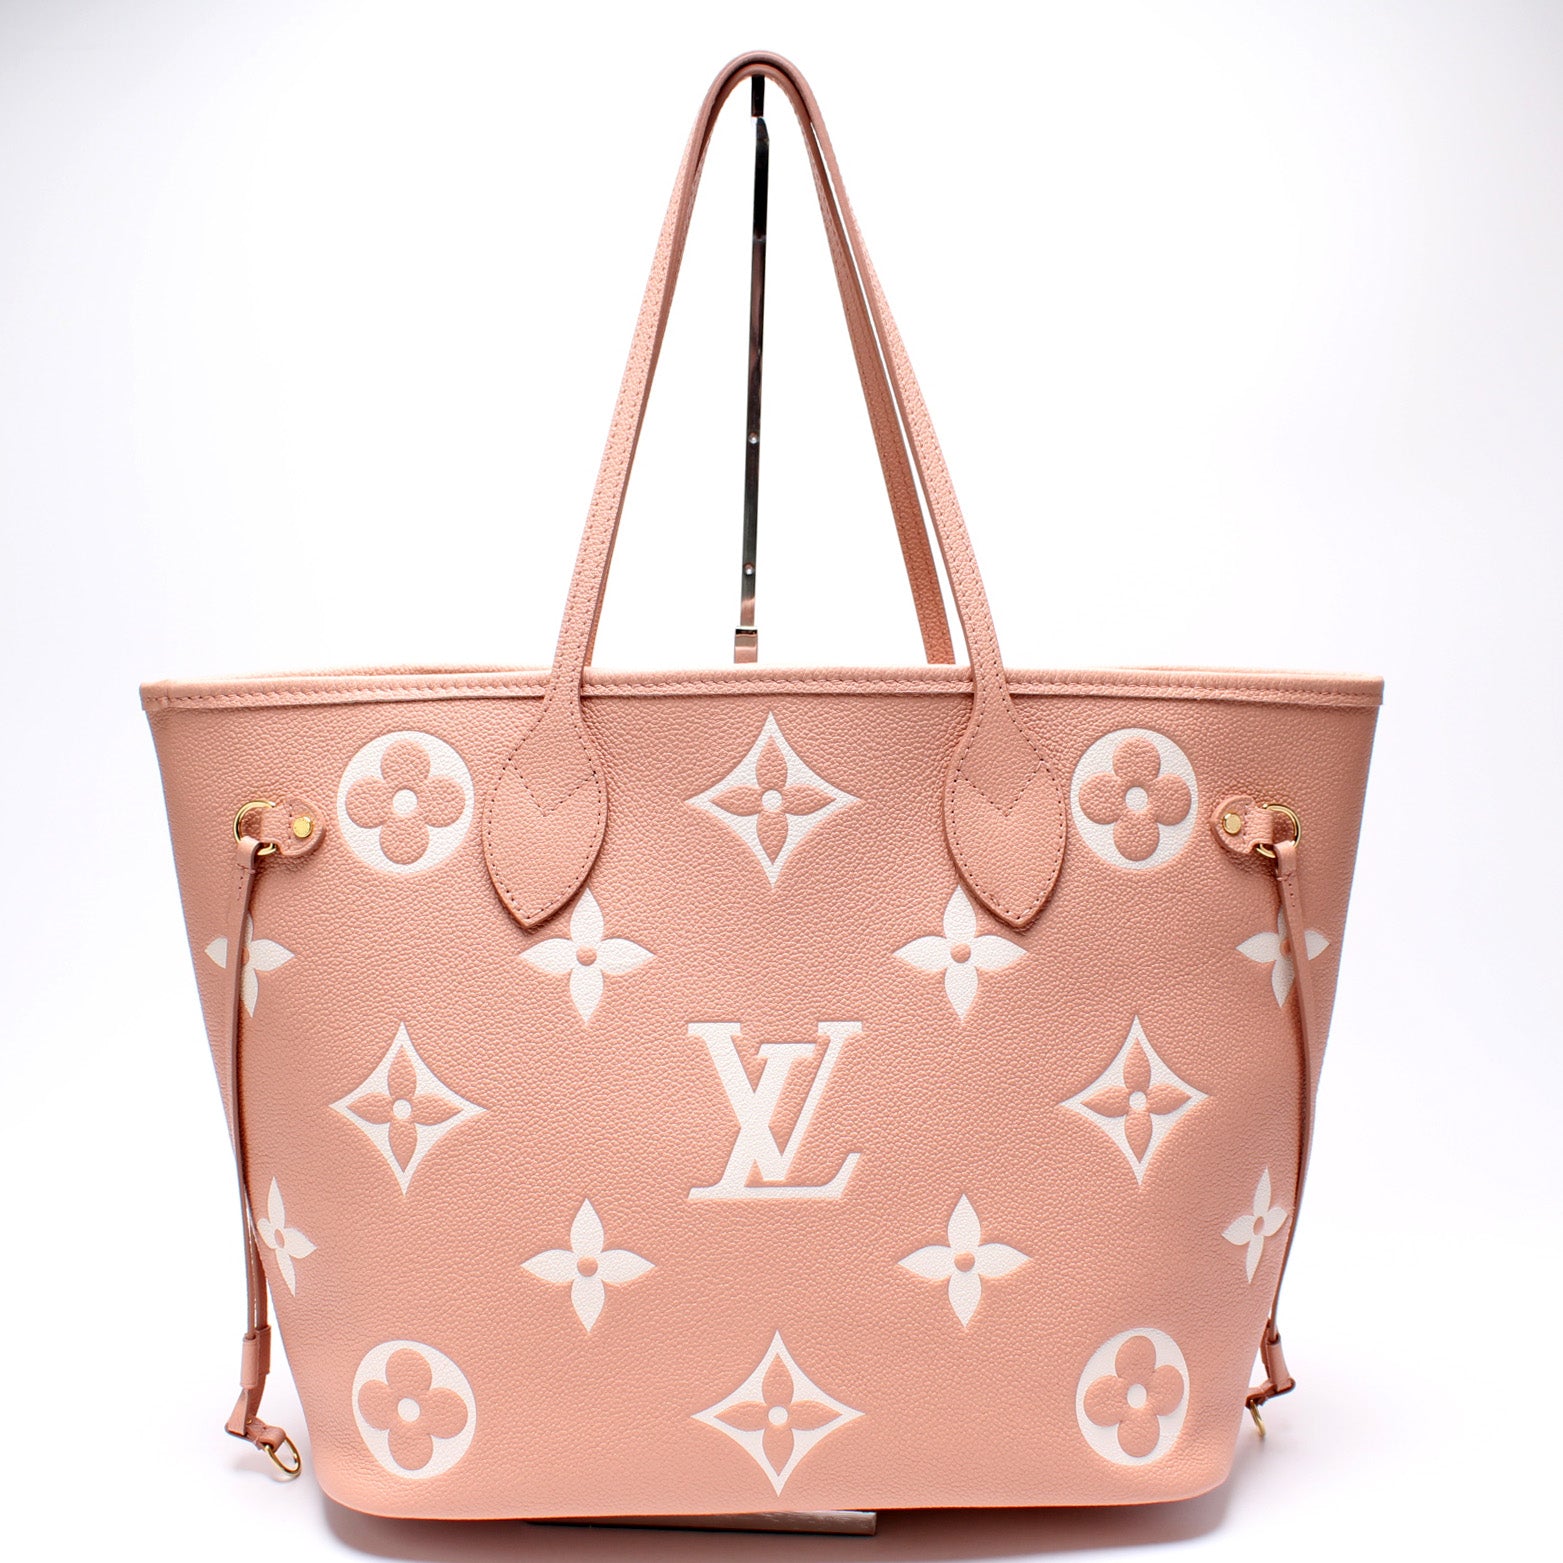 louis vuitton neverfull mm good condition comes with wallet !